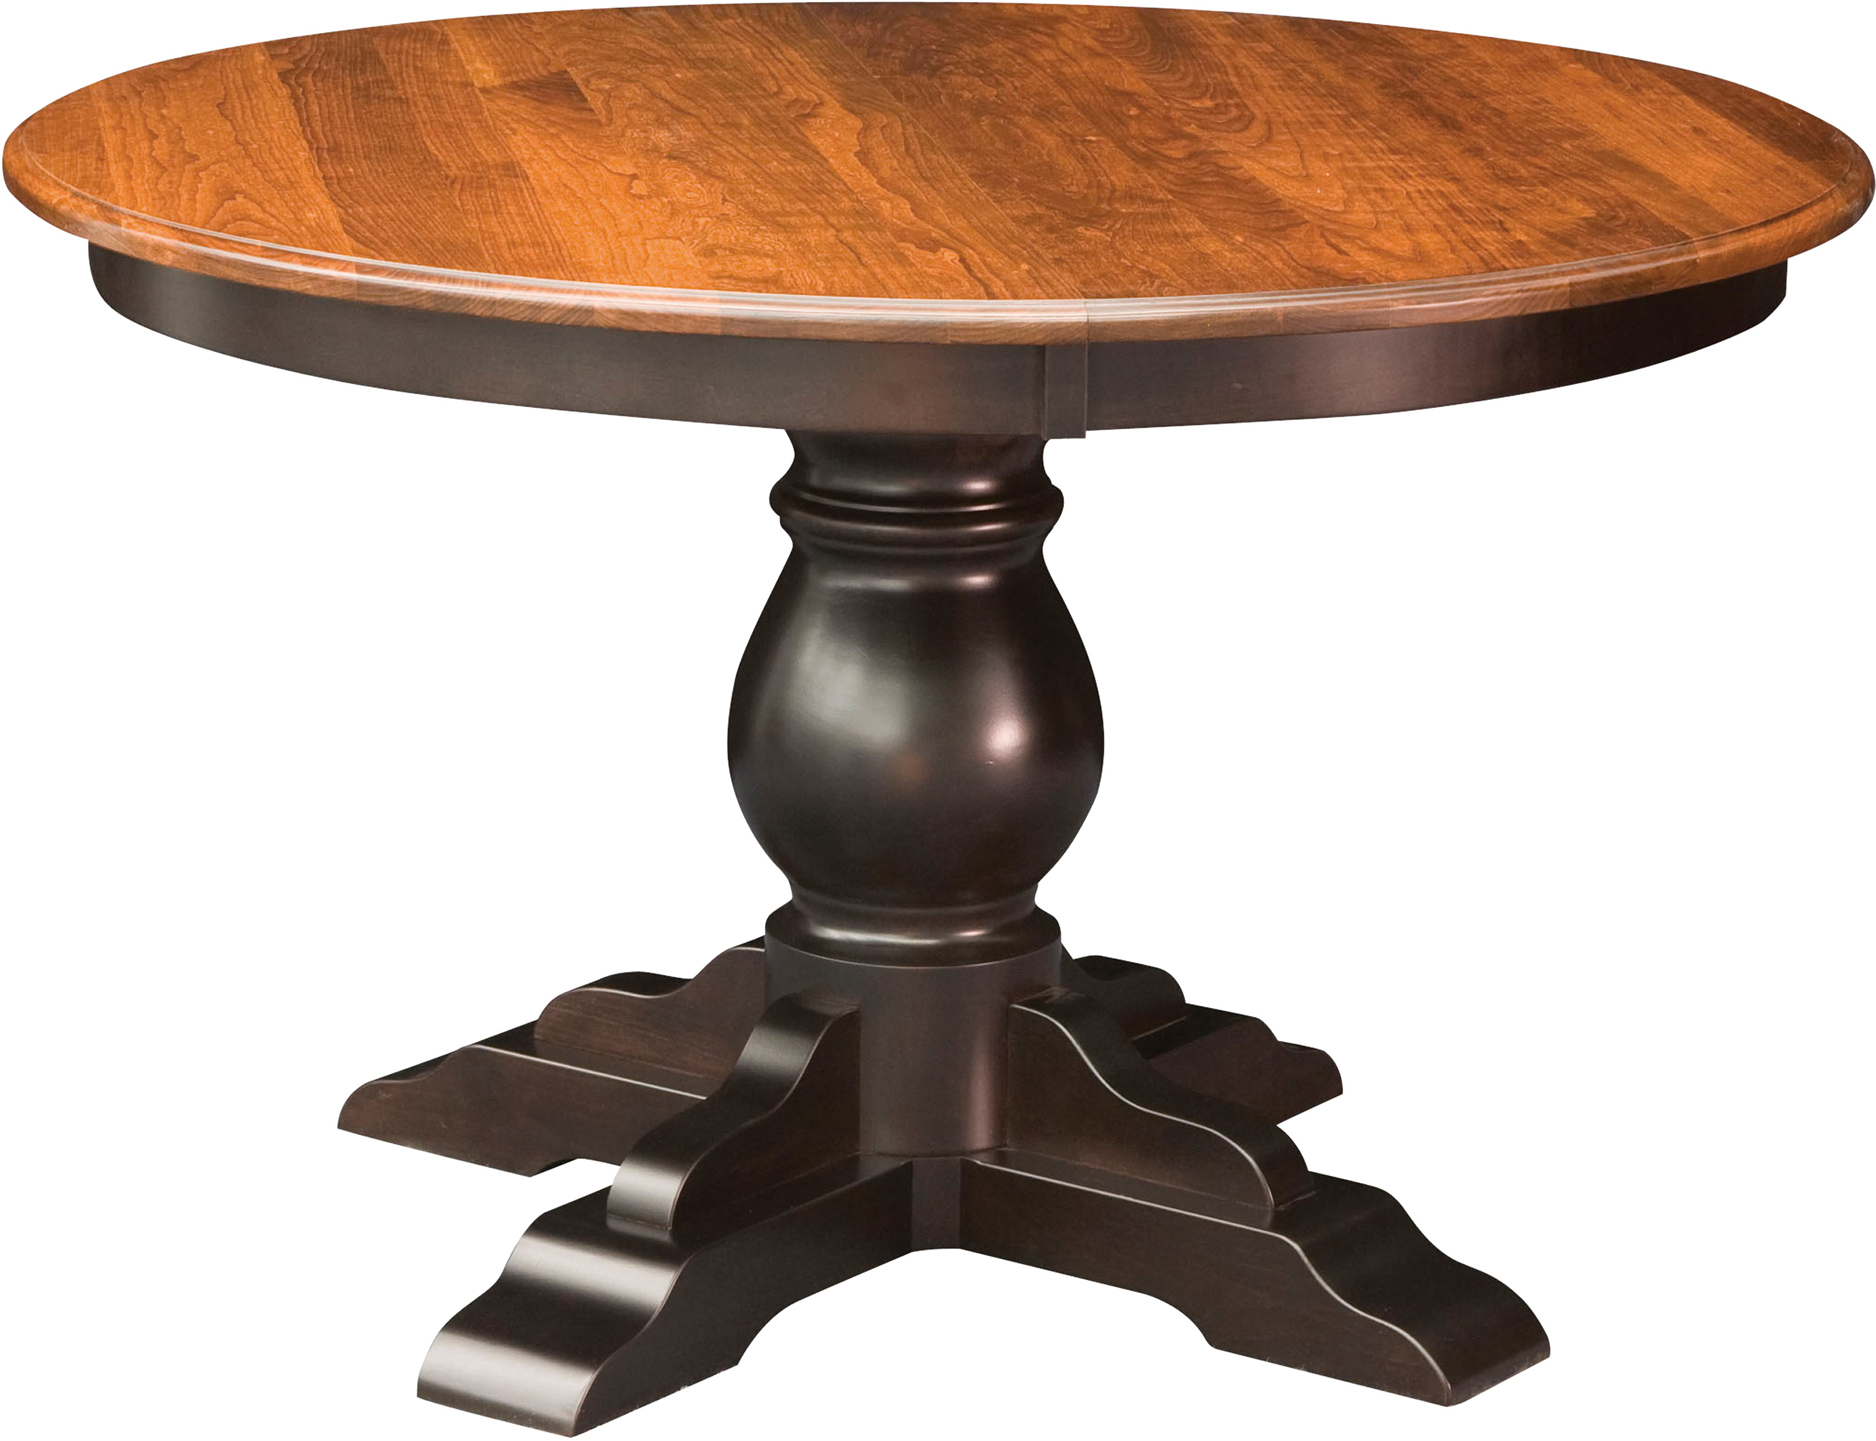 Round Wood Pedestal Dining Room Table